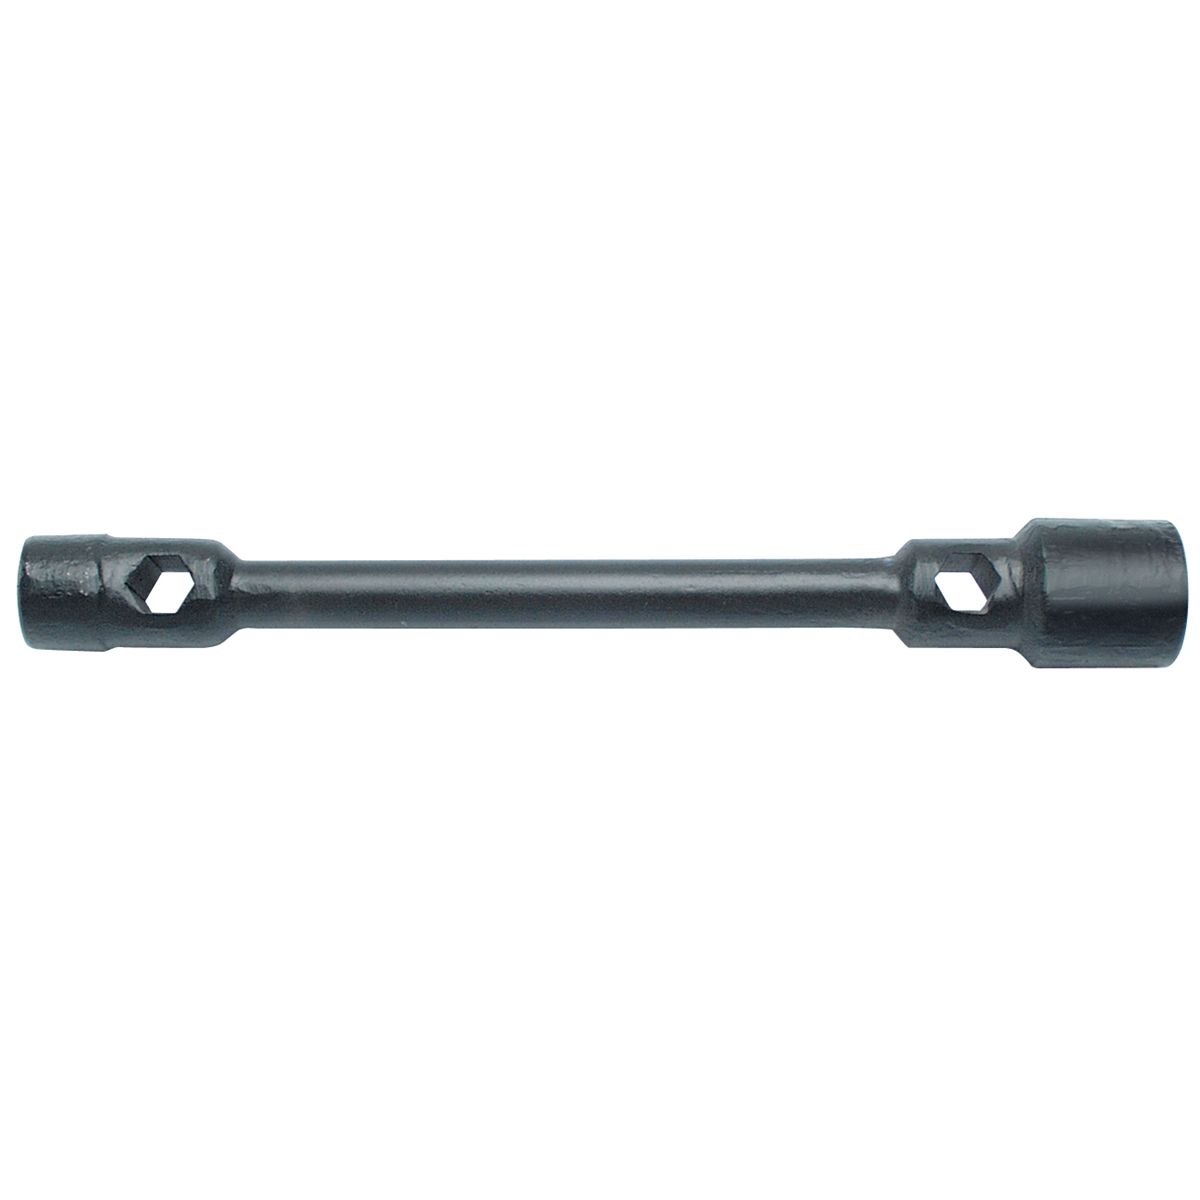 Double-End Metric Truck Wrench TRM6 - 21mm Square x 41mm